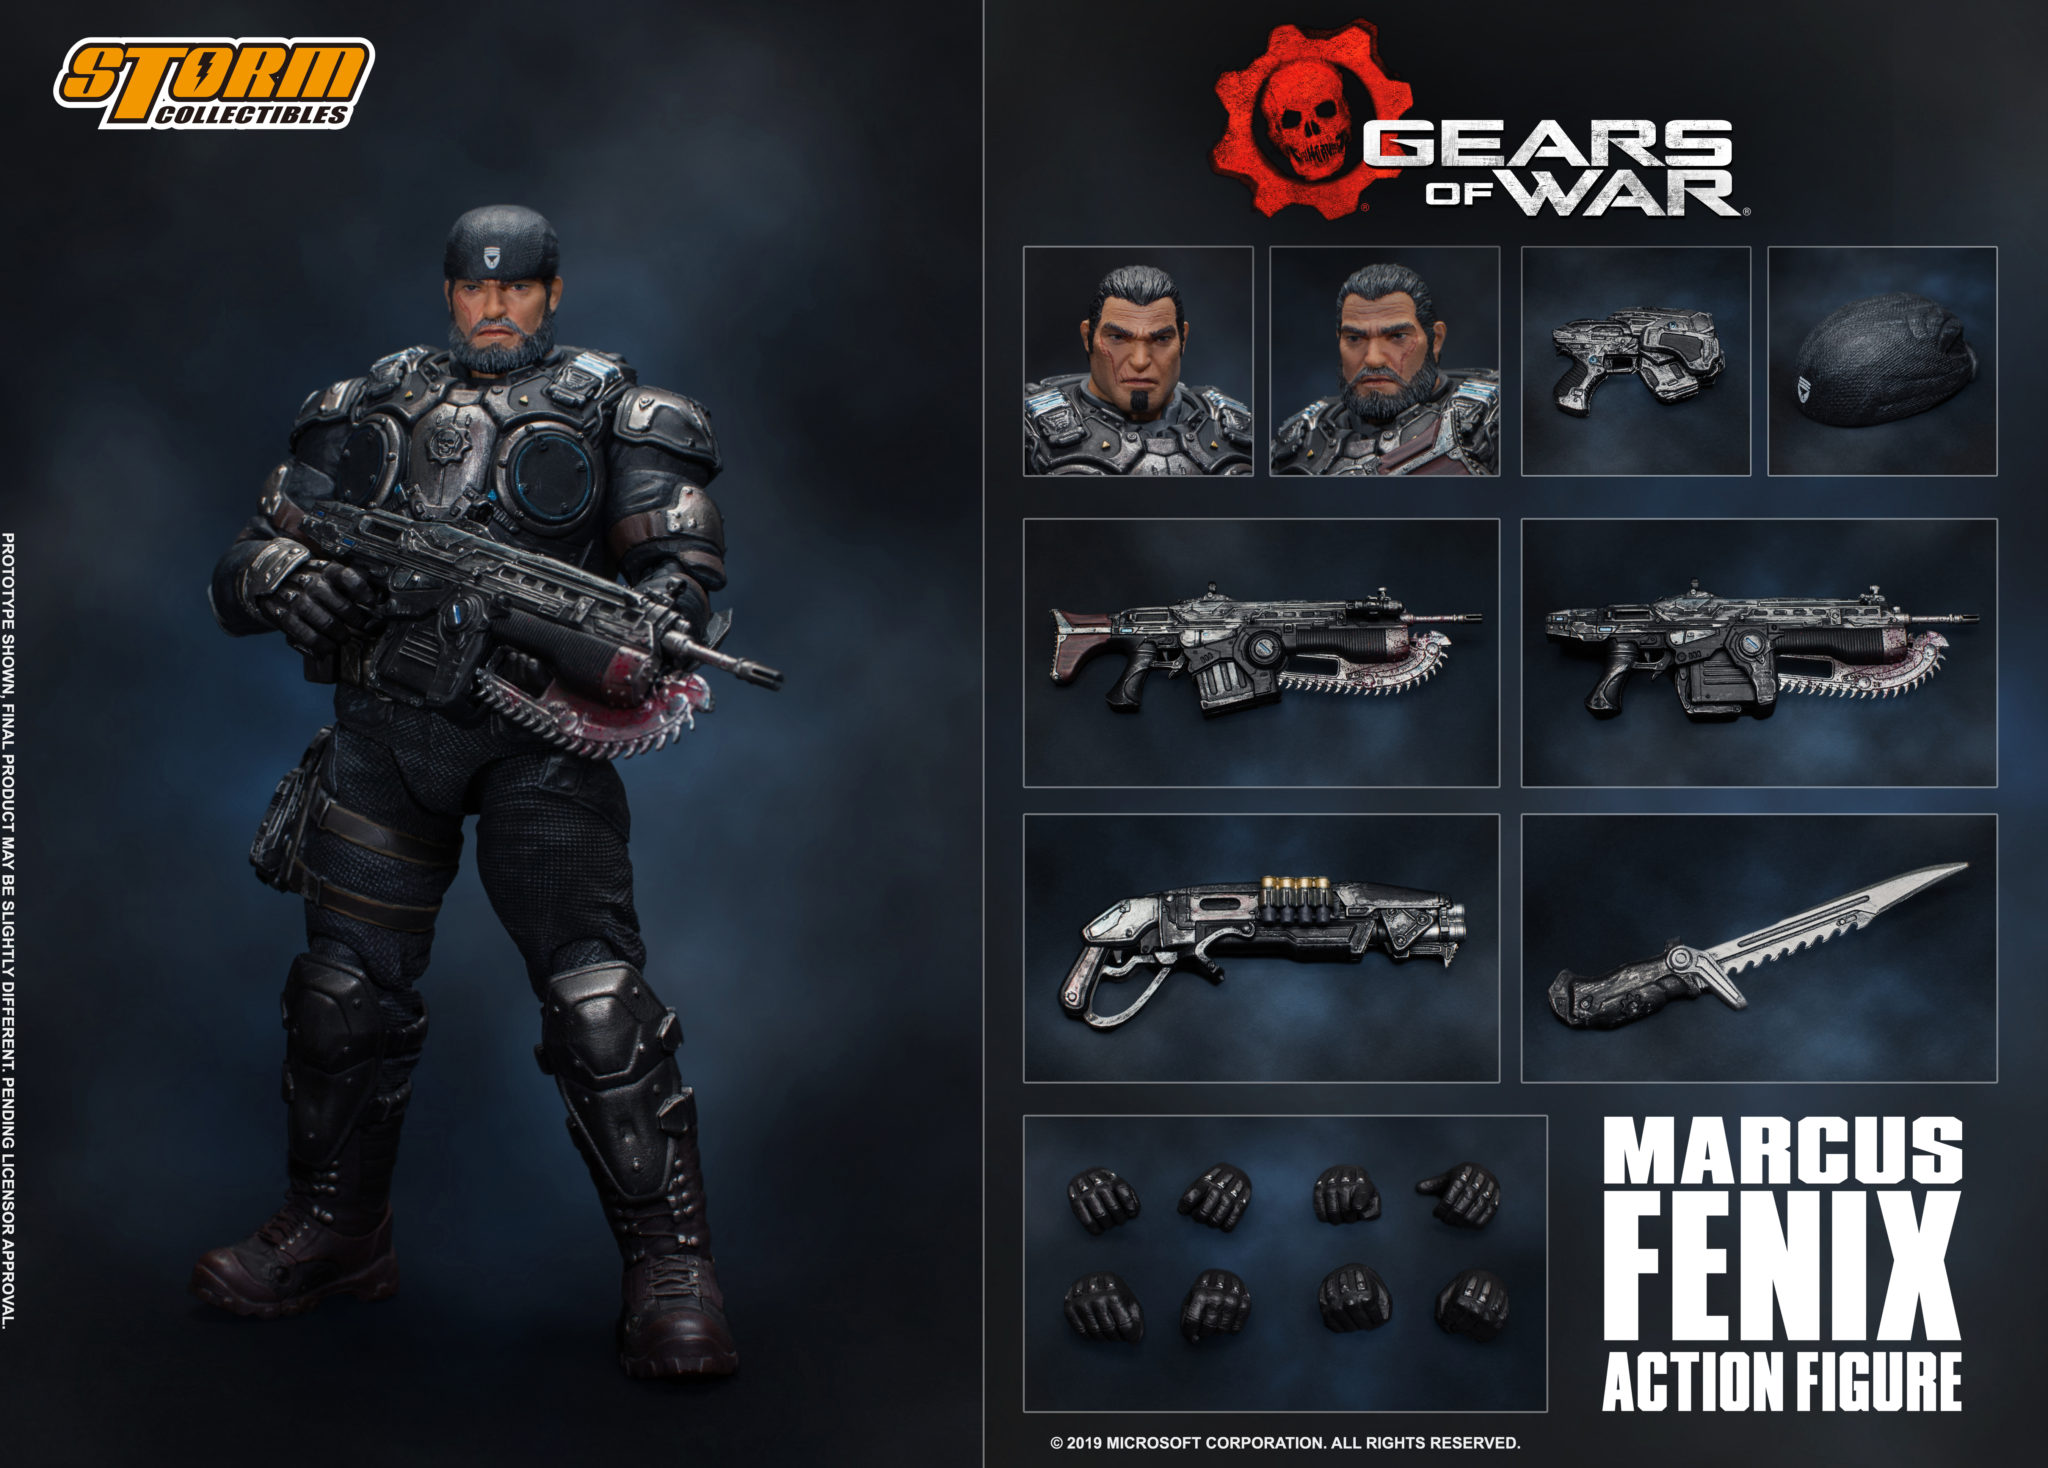 Gears of War: New Line of Collectibles and Books to Debut at New York Toy Fair